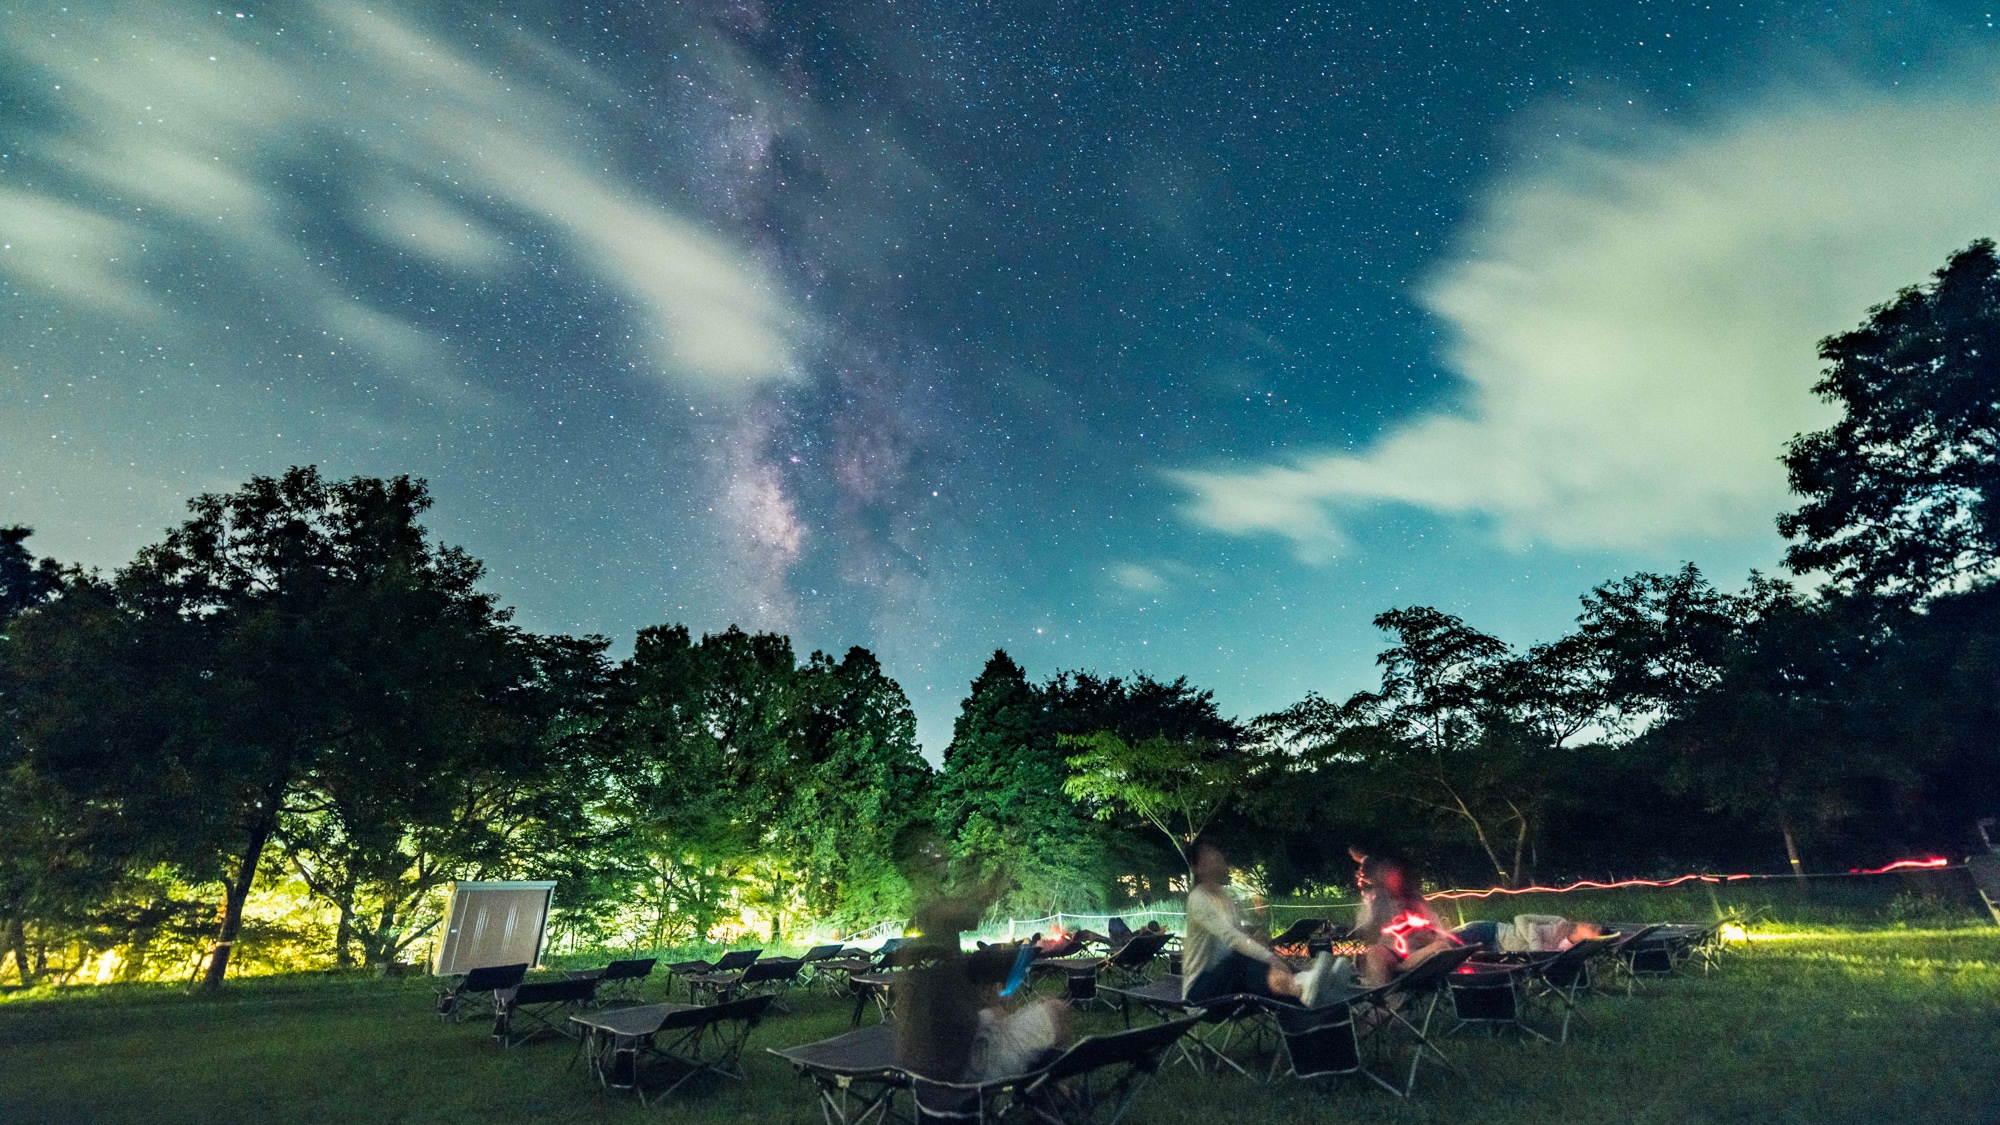  Hoshimigahara where you can lie down and enjoy the real starry sky "freely, safely and to your heart's content"